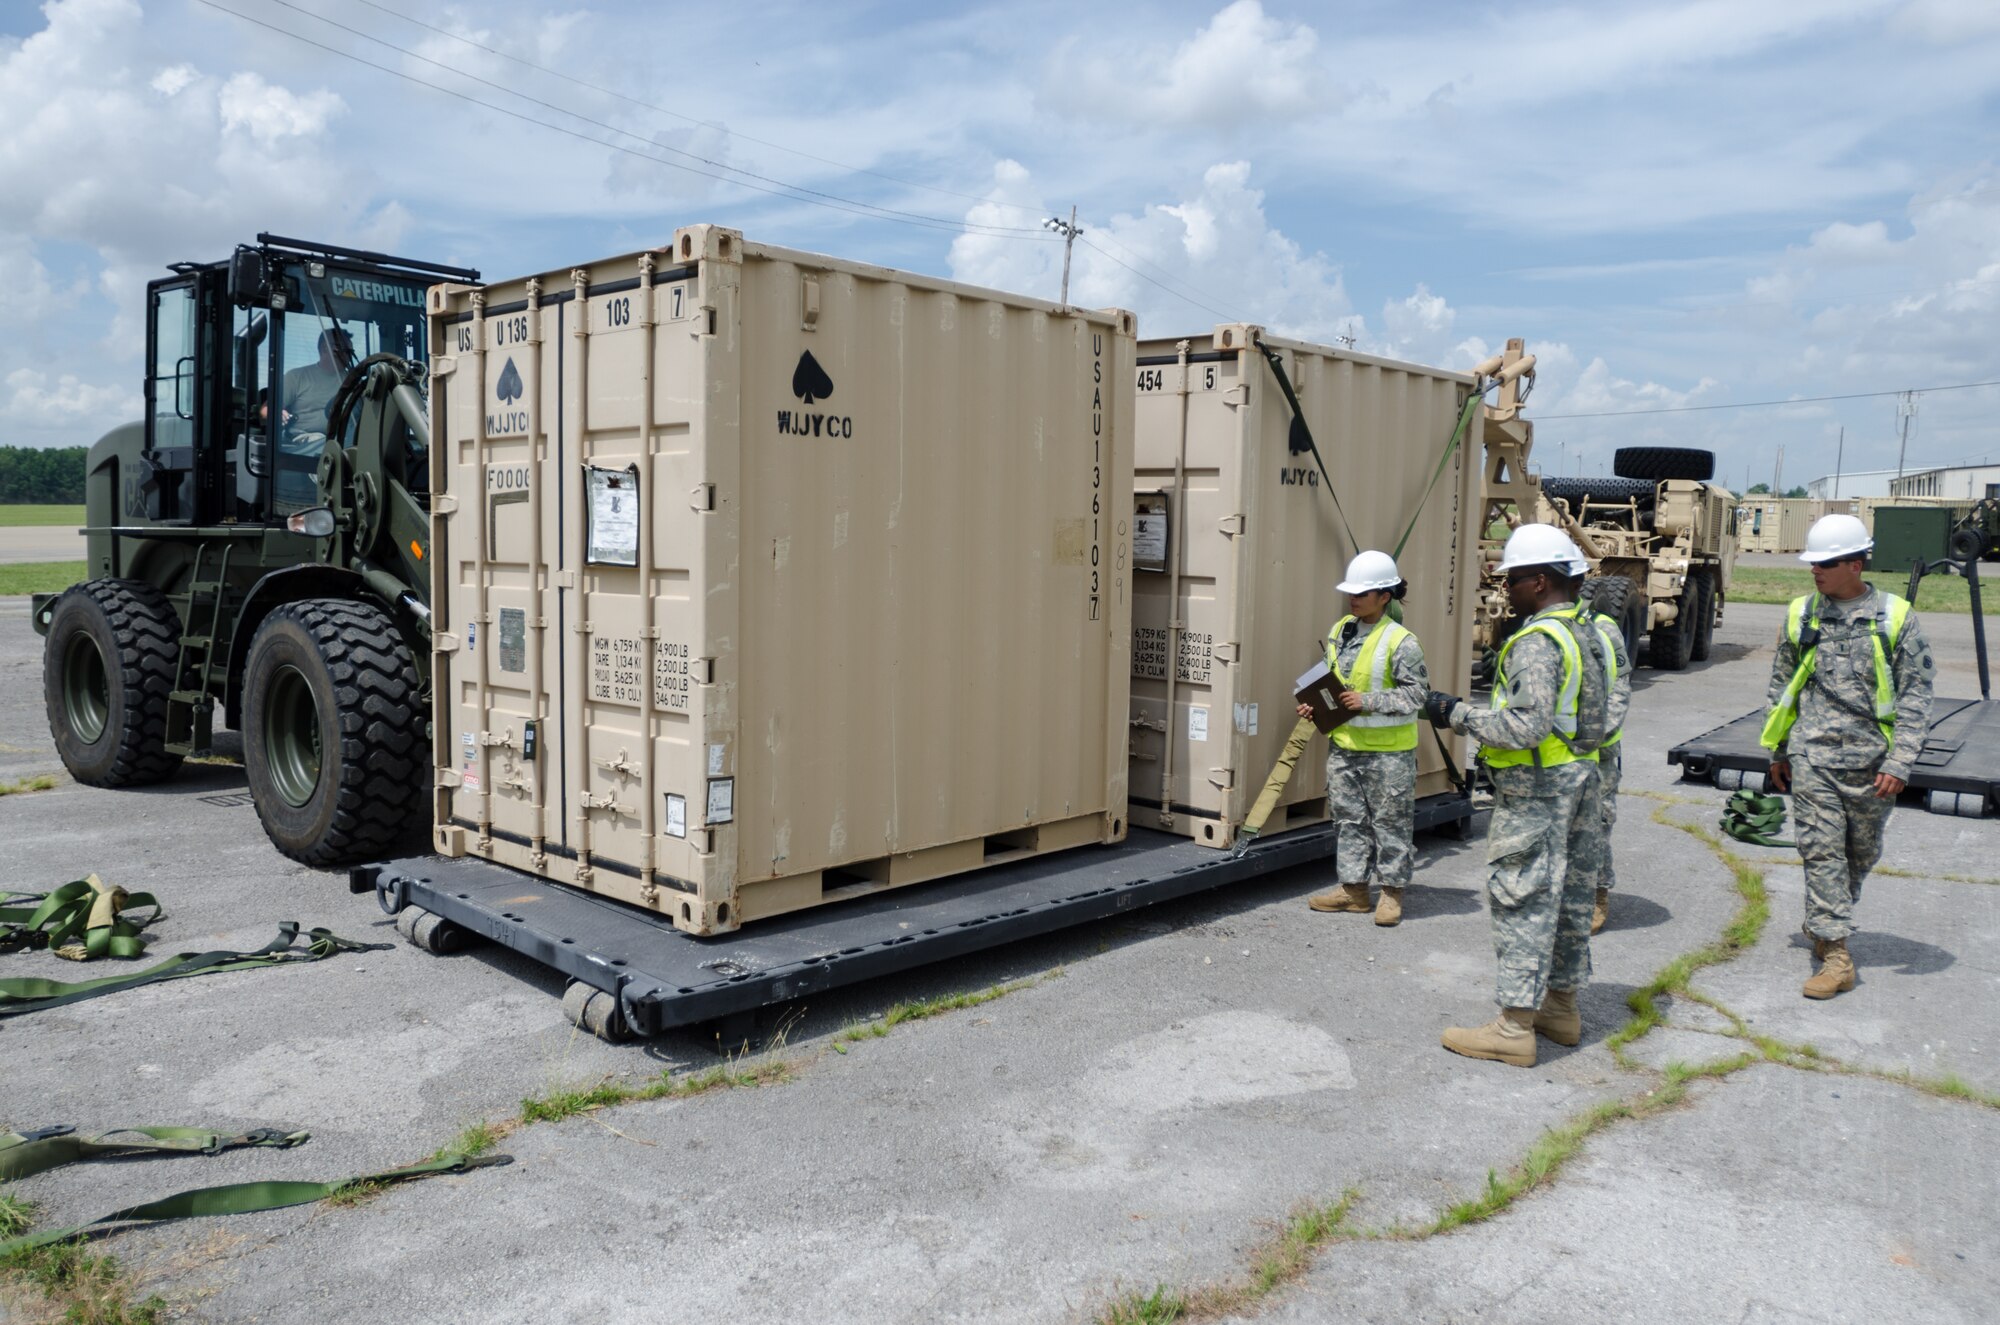 Soldiers from the U.S. Army’s 688th Rapid Port Opening Element inspect cargo on June 18, 2014, before strapping it down for transport to a staging area called the Forward Node during Capstone '14, a homeland earthquake-response exercise at Fort Campbell, Ky. The 688th RPOE joined forces with the Kentucky Air National Guard’s 123rd Contingency Response Group to operate a Joint Task Force-Port Opening here from June 16 to 19, 2014. (U.S. Air National Guard photo by Master Sgt. Phil Speck)